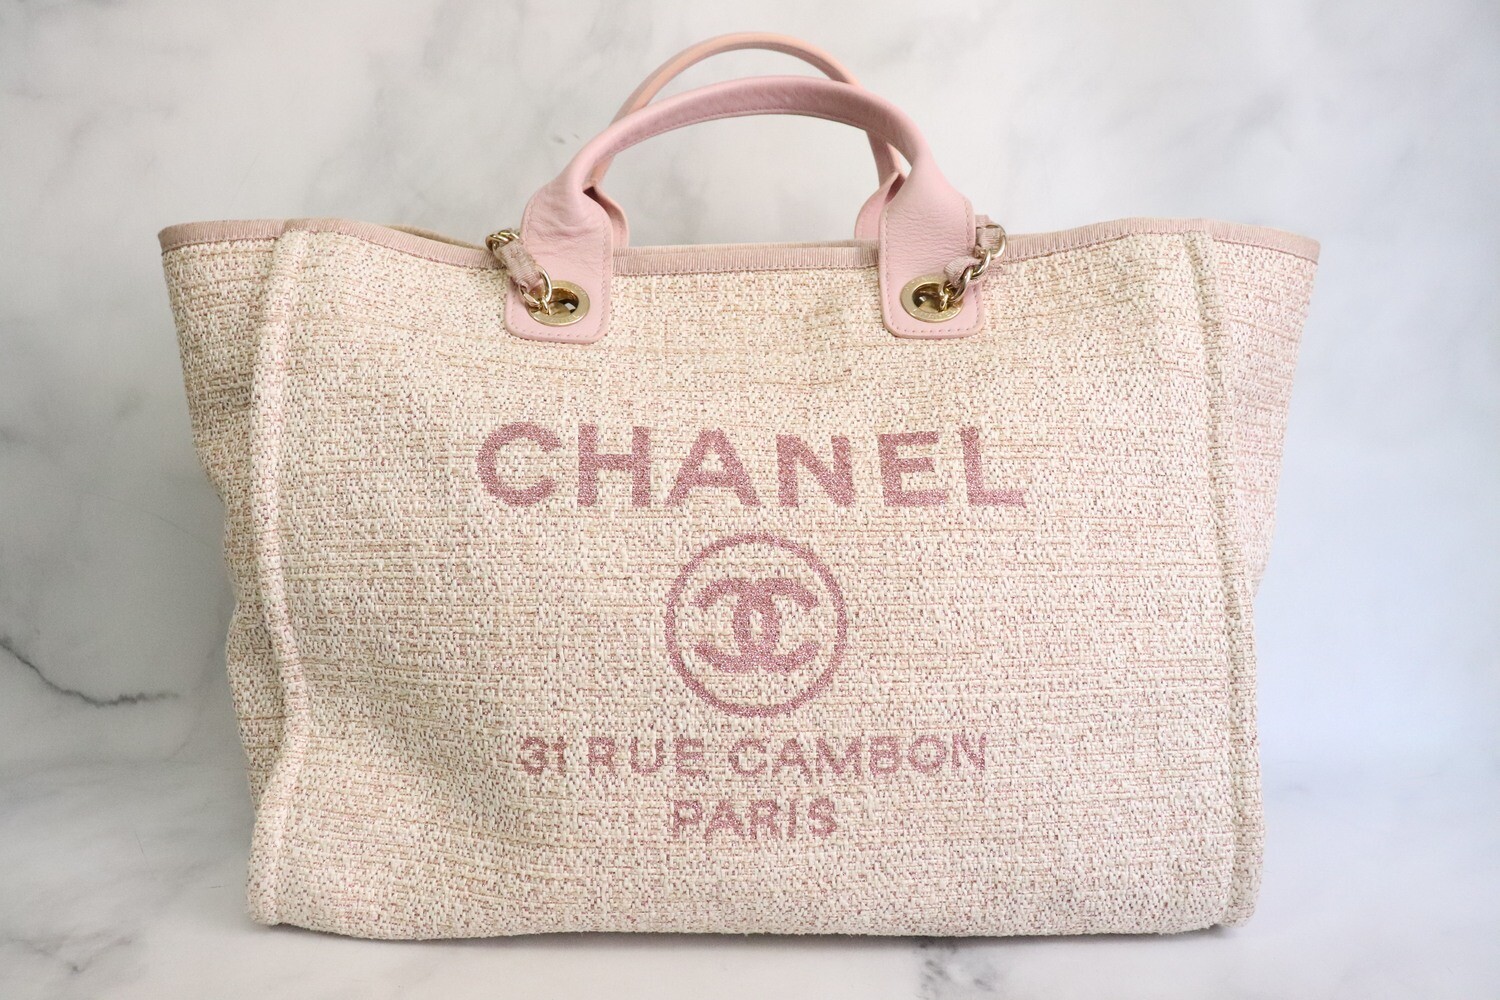 Chanel Pink Canvas Large Deauville Shopping Tote